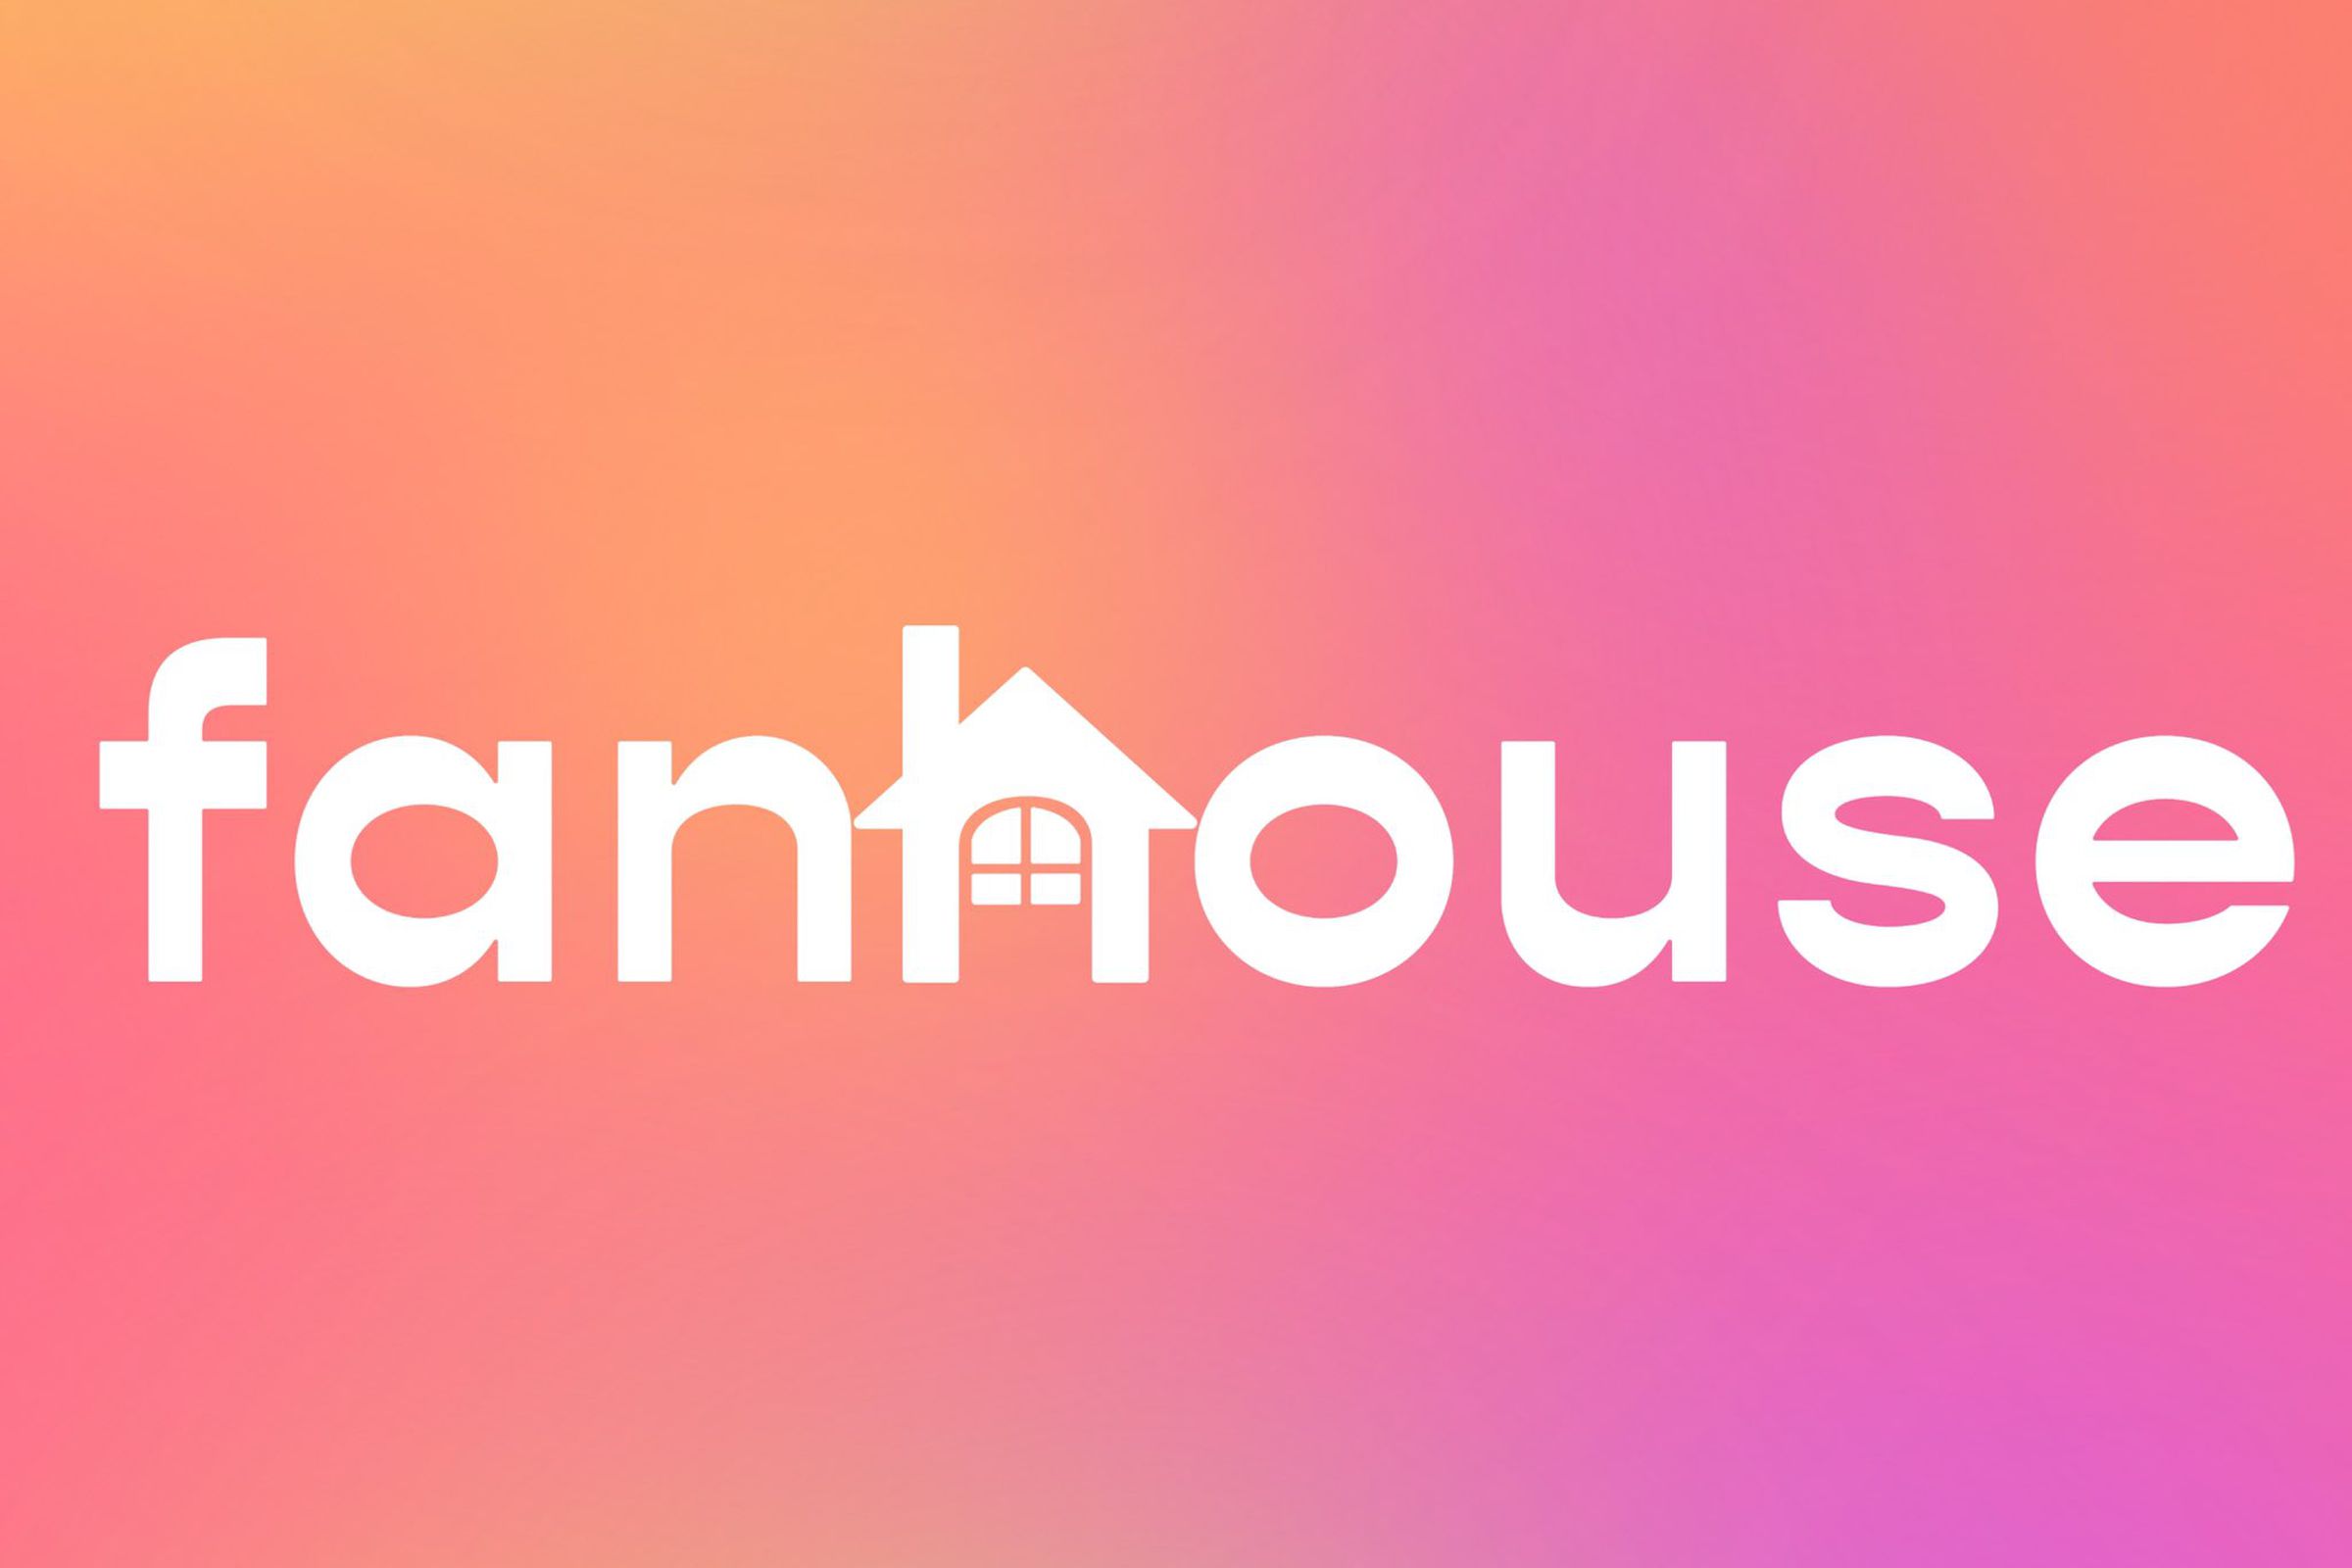 The name “Fanhouse” on a tie-dye background. The H is shaped like a house.